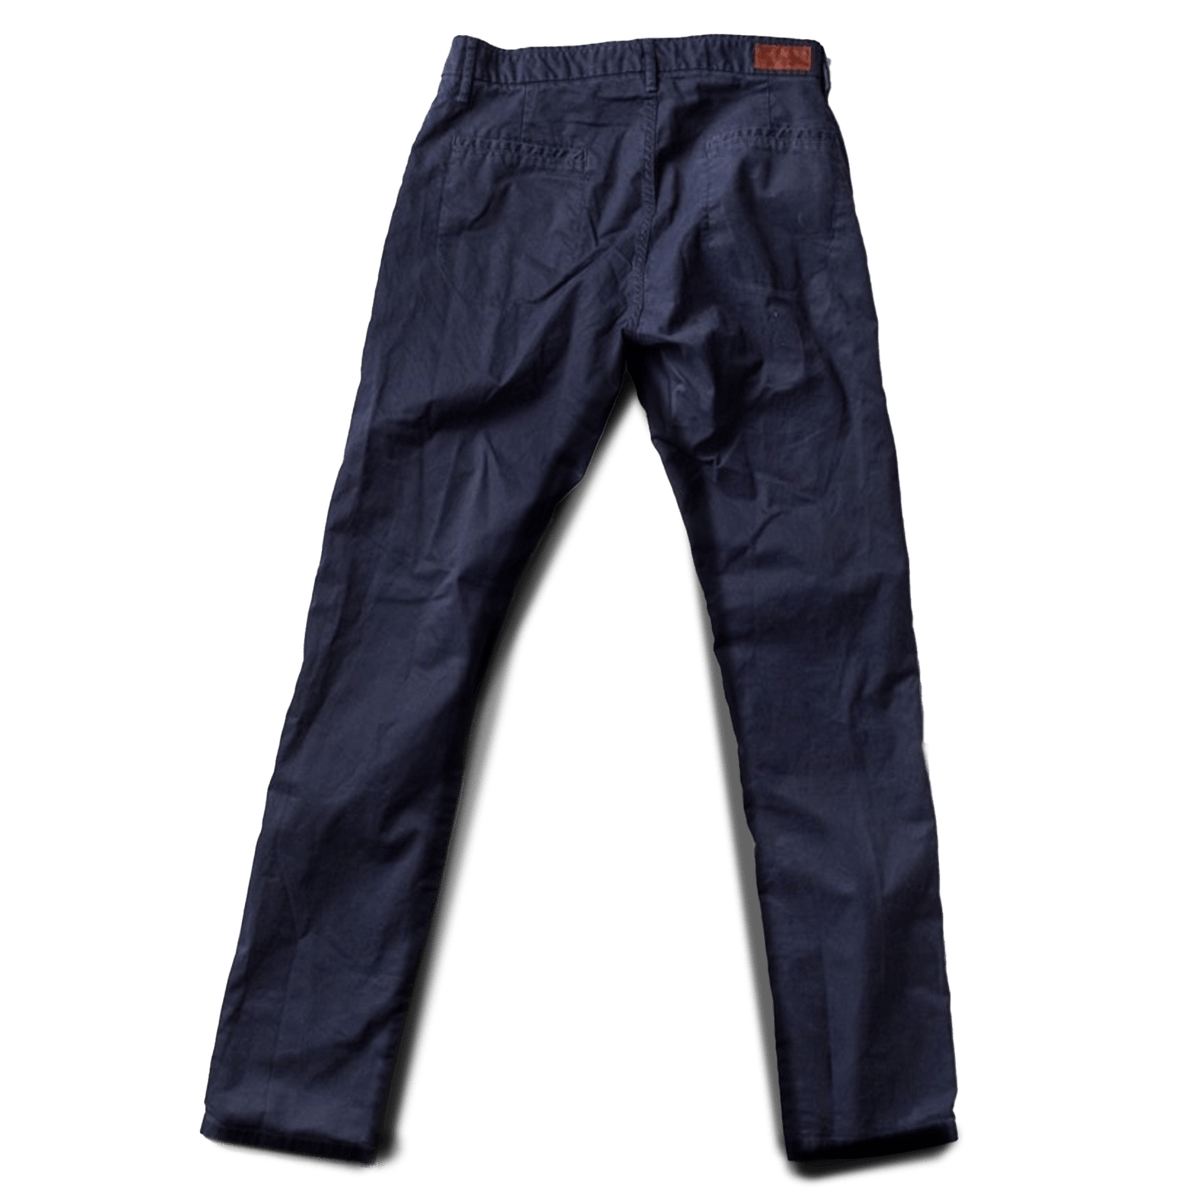 Independent Slim Pant - Ultimate Twill - Navy - grown&amp;sewn